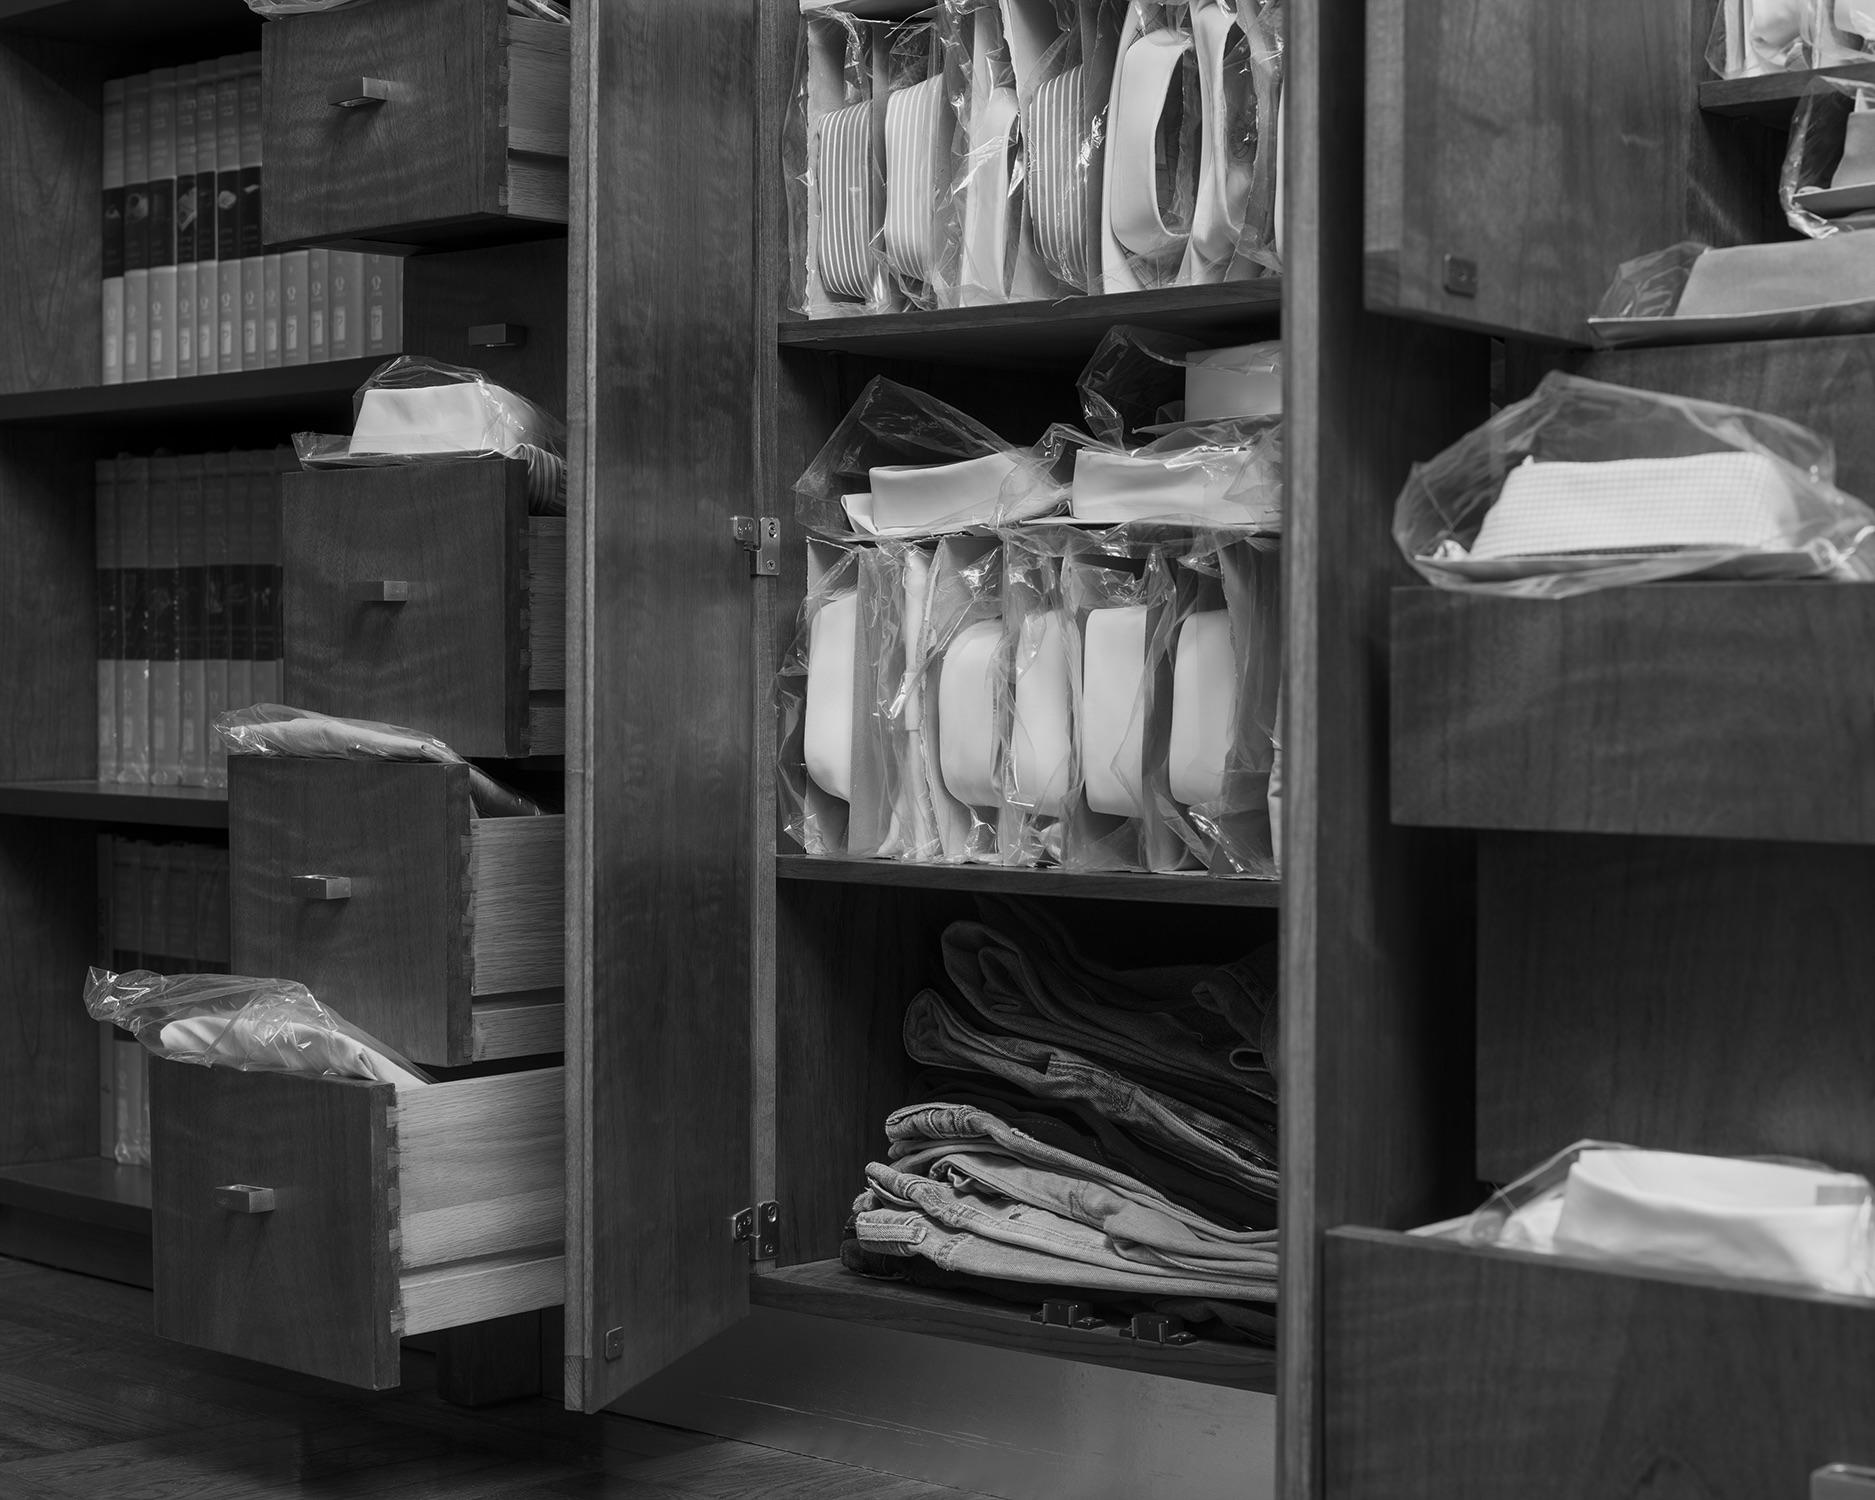 Black and white pigment print of folded shirts emerging from cabinets and drawers. 